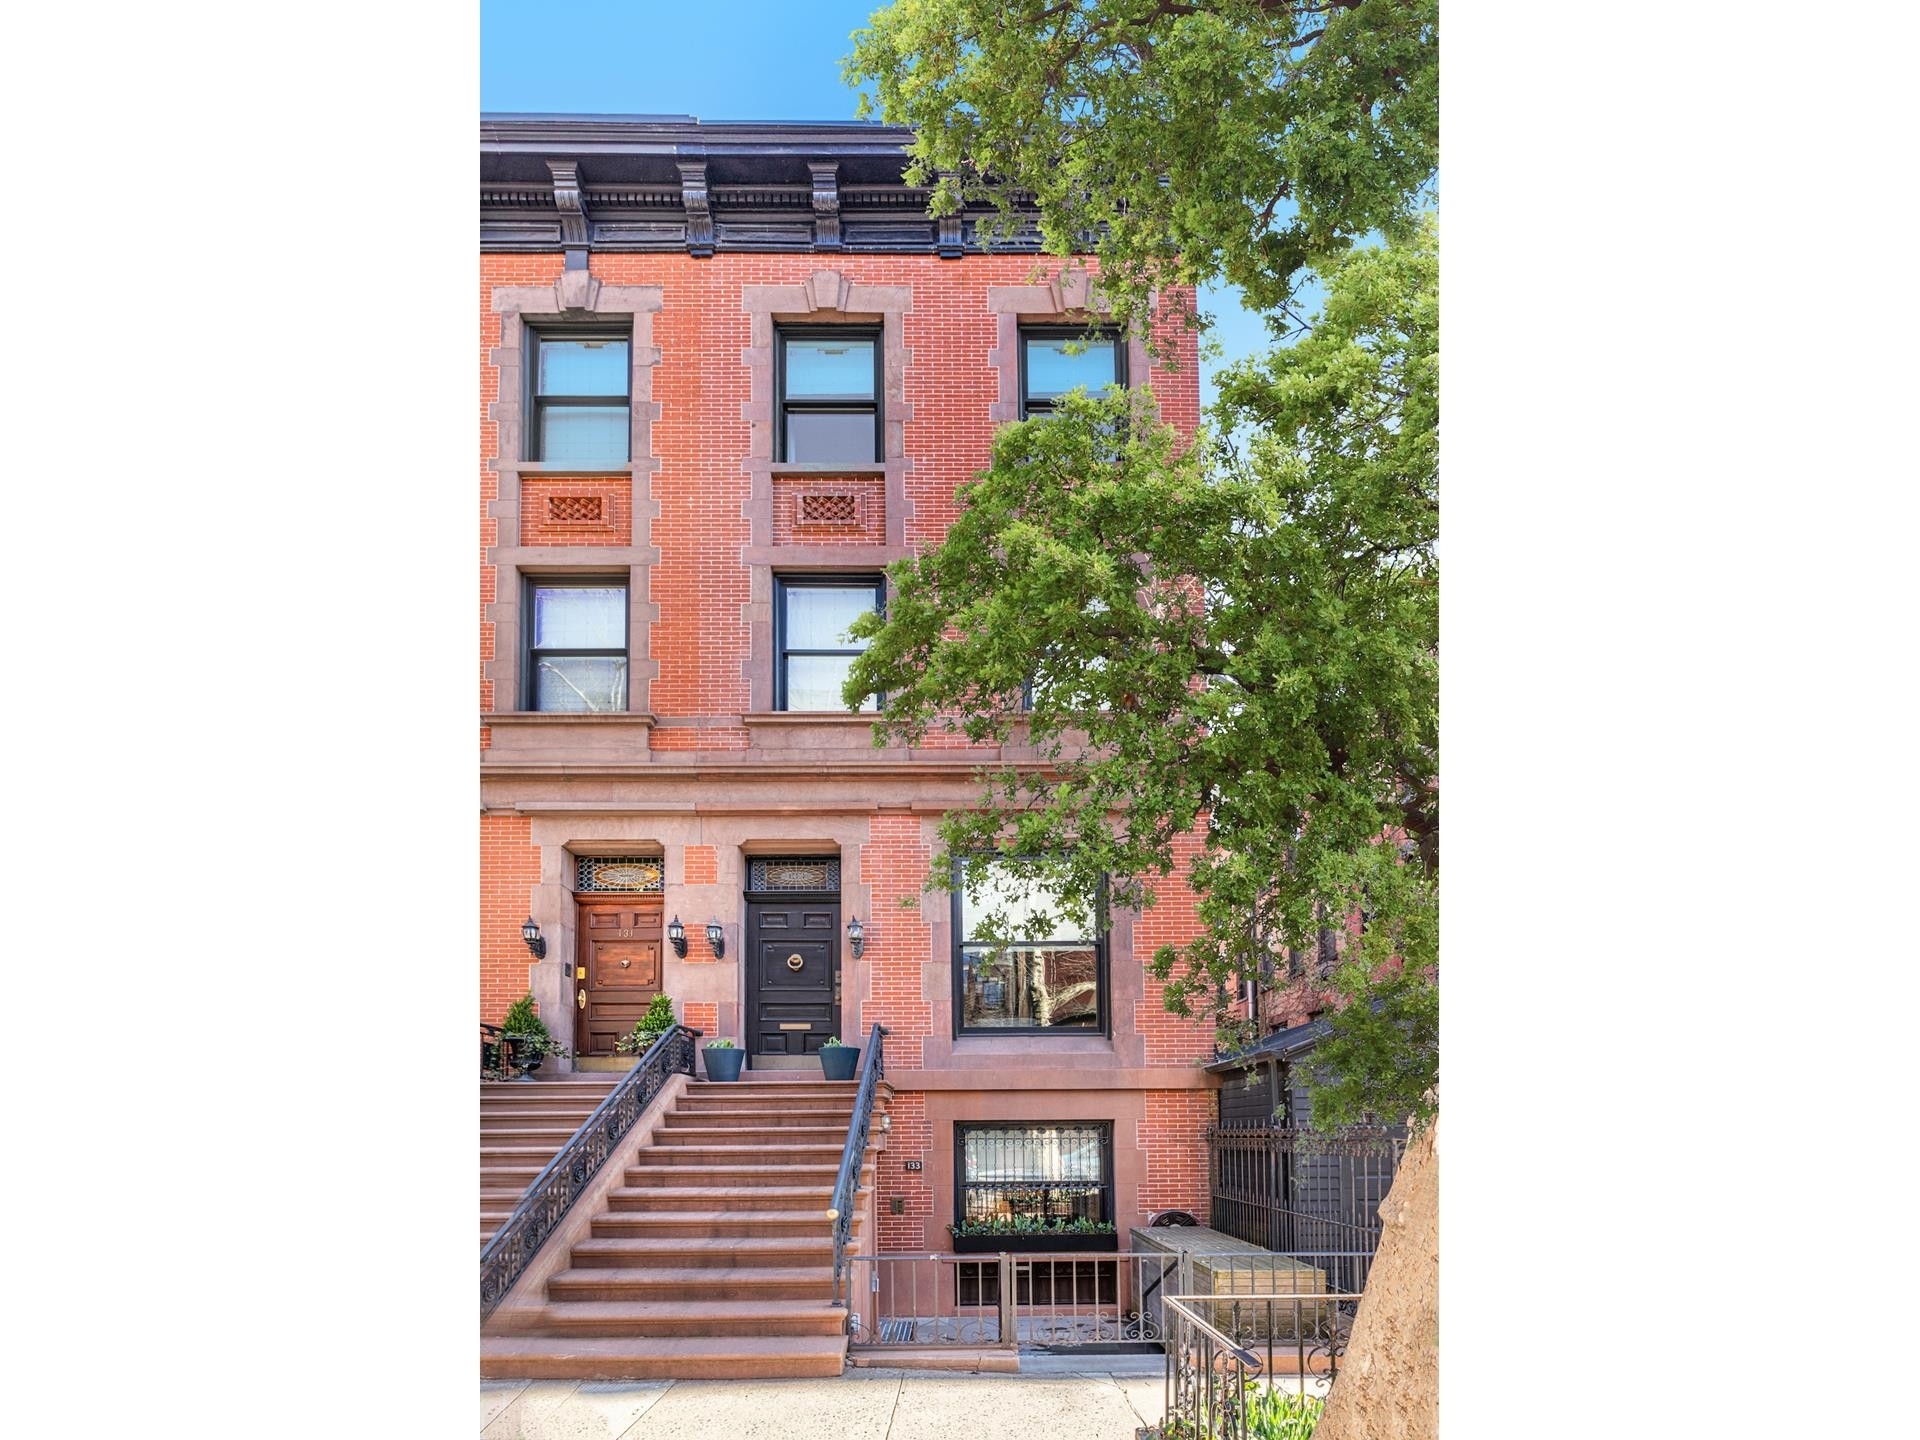 19. Single Family Townhouse for Sale at 133 E 91ST ST, TOWNHOUSE Carnegie Hill, New York, New York 10128